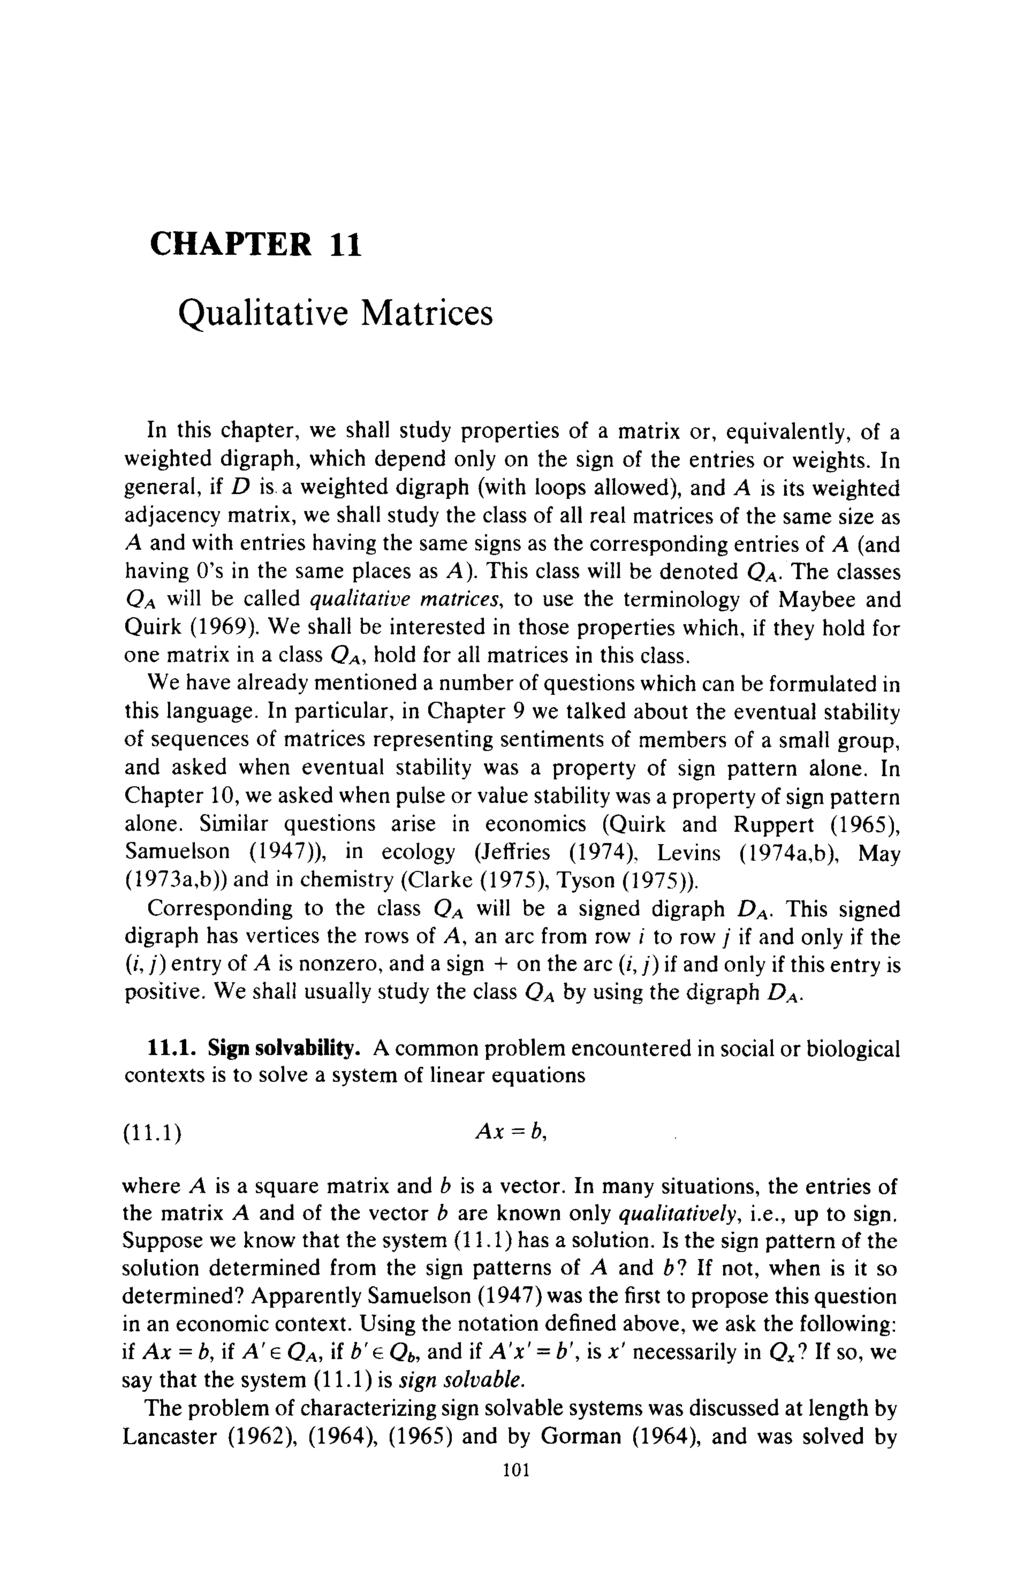 CHAPTER 11 Qualitative Matrices In this chapter, we shall study properties of a matrix or, equivalently, of a weighted digraph, which depend only on the sign of the entries or weights.